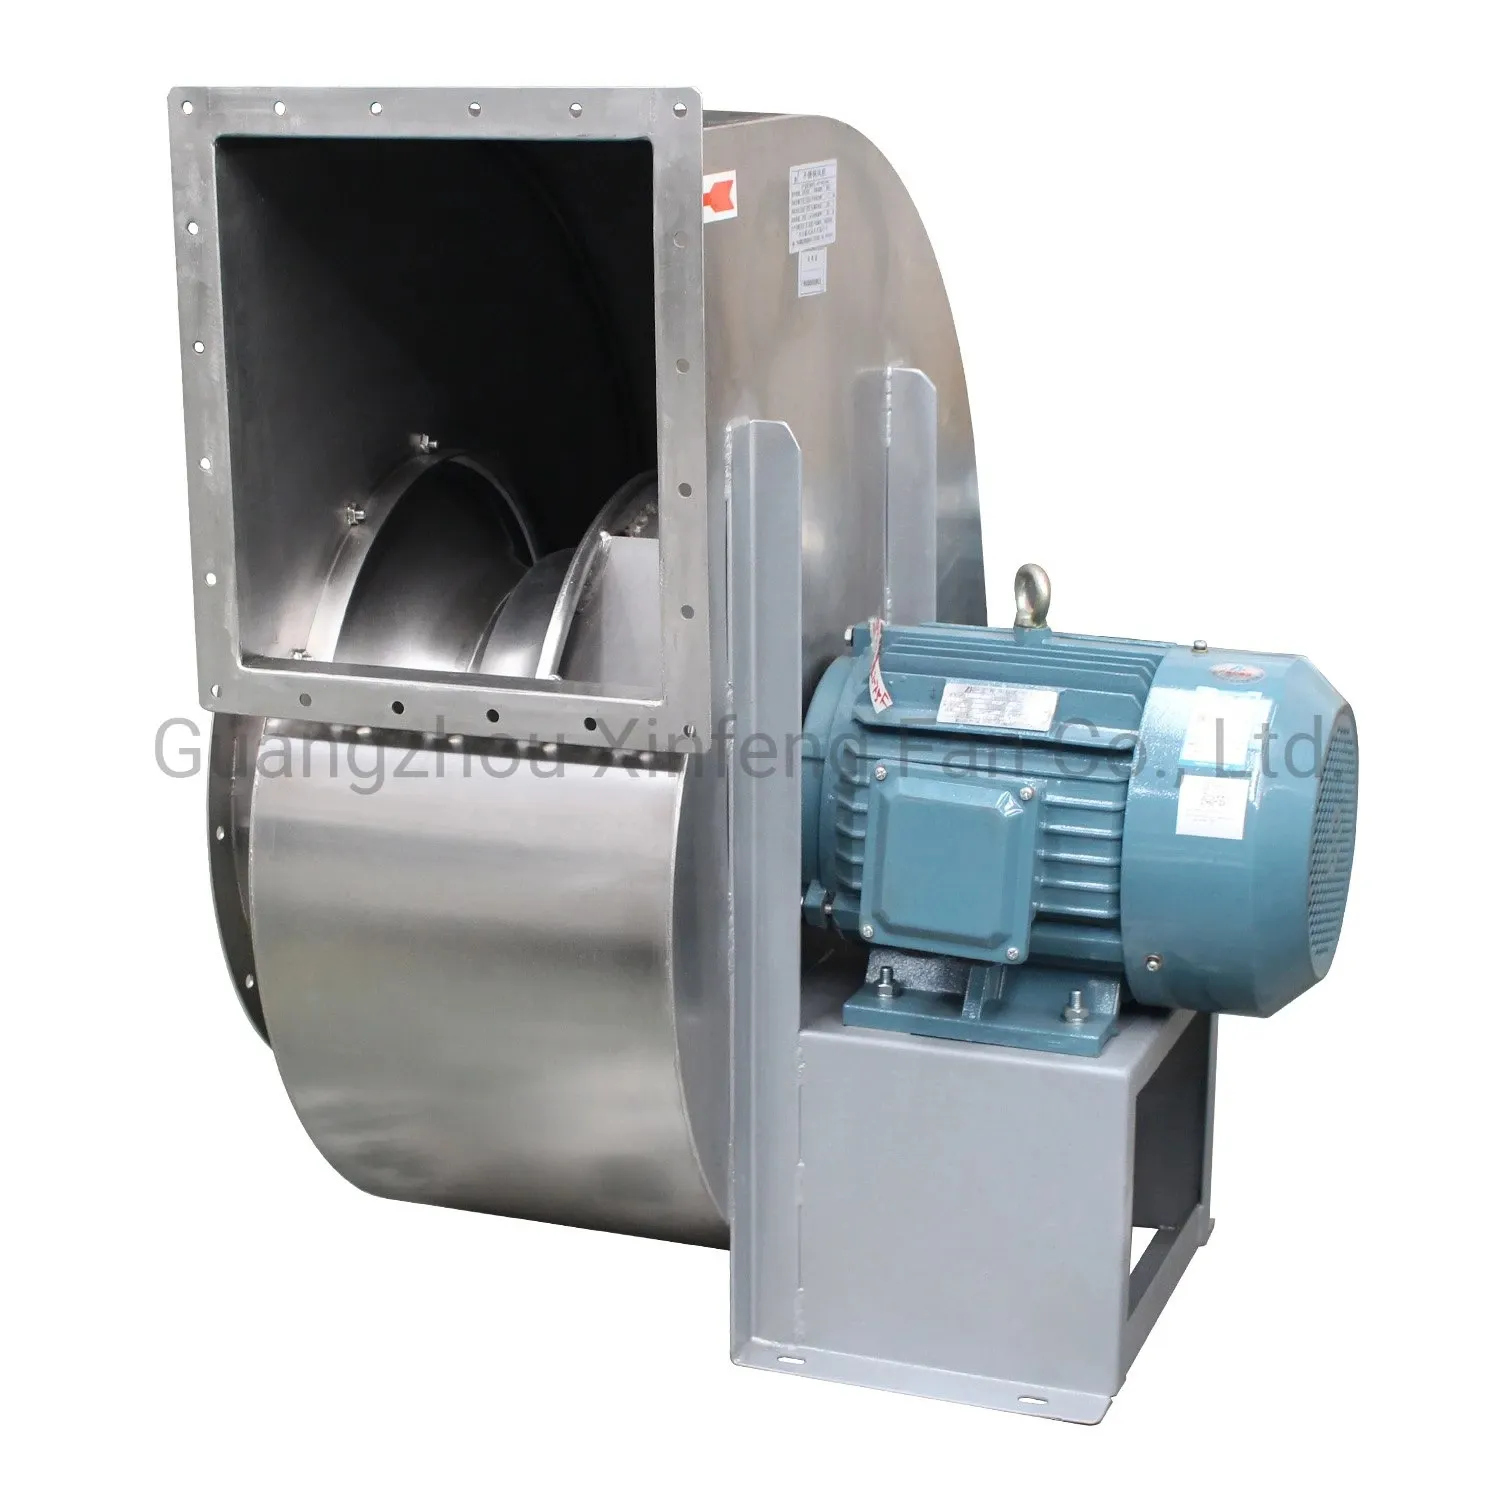 High Temperature Resistant Stainless Steel Industrial Centrifugal Exhaust Fan Blower